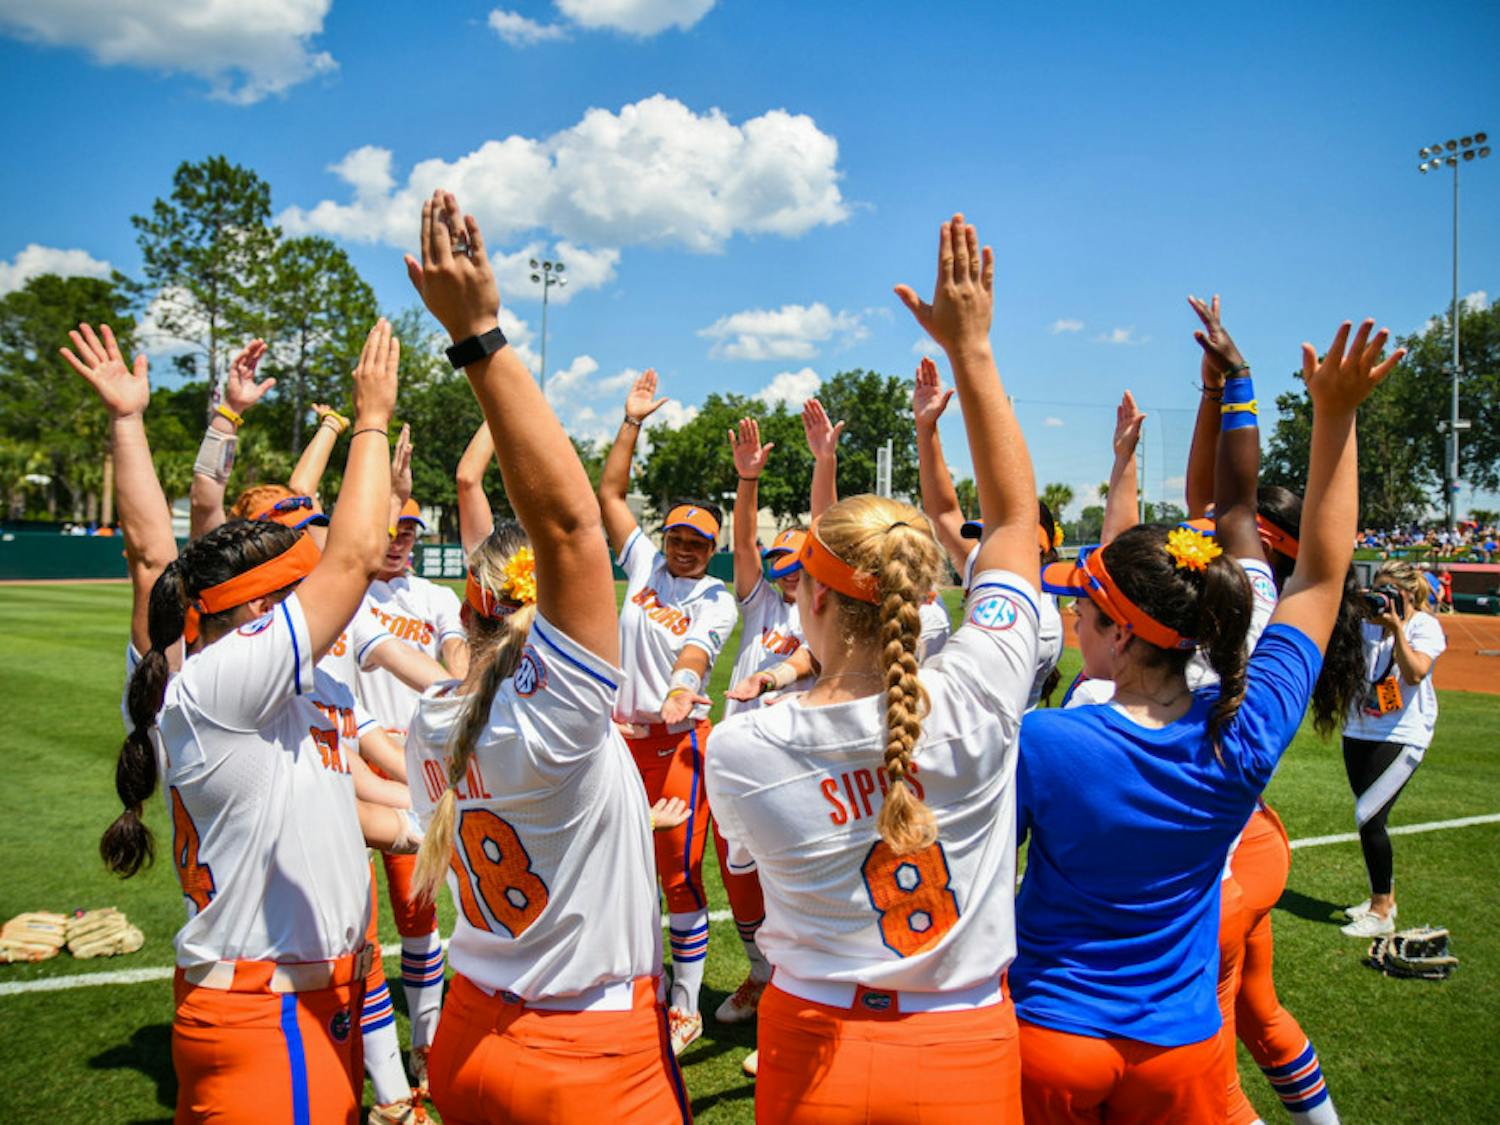 Stellar pitching from Kelly Barnhill and consistent hitting from Amanda Lorenz led UF to a WCWS berth.